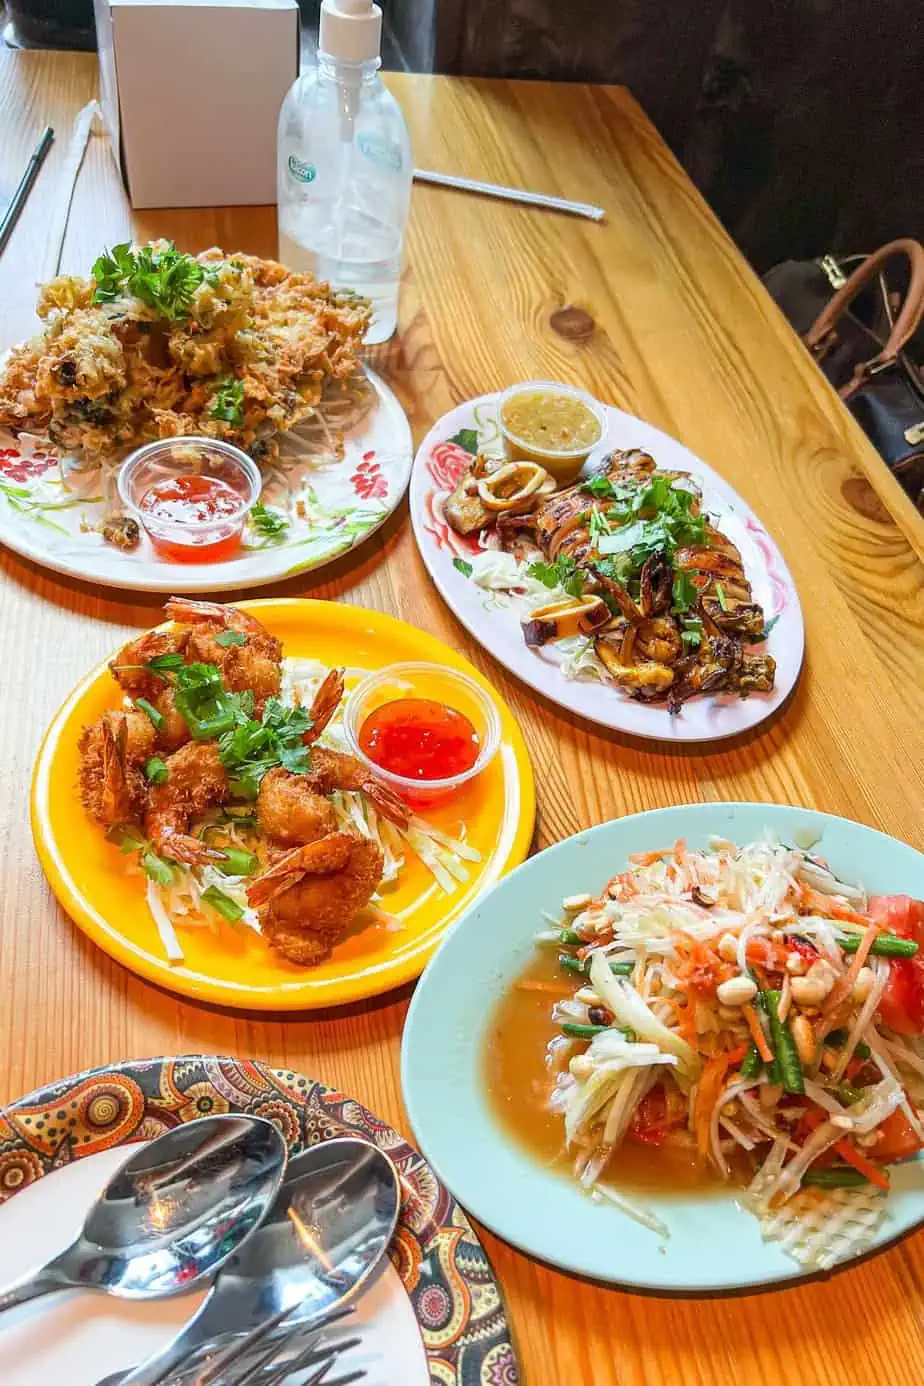 Cafe Isan JLT's collection of Thai dishes over lunch including a mussel omelette, charred baby squid, coconut ship and a papaya salad.